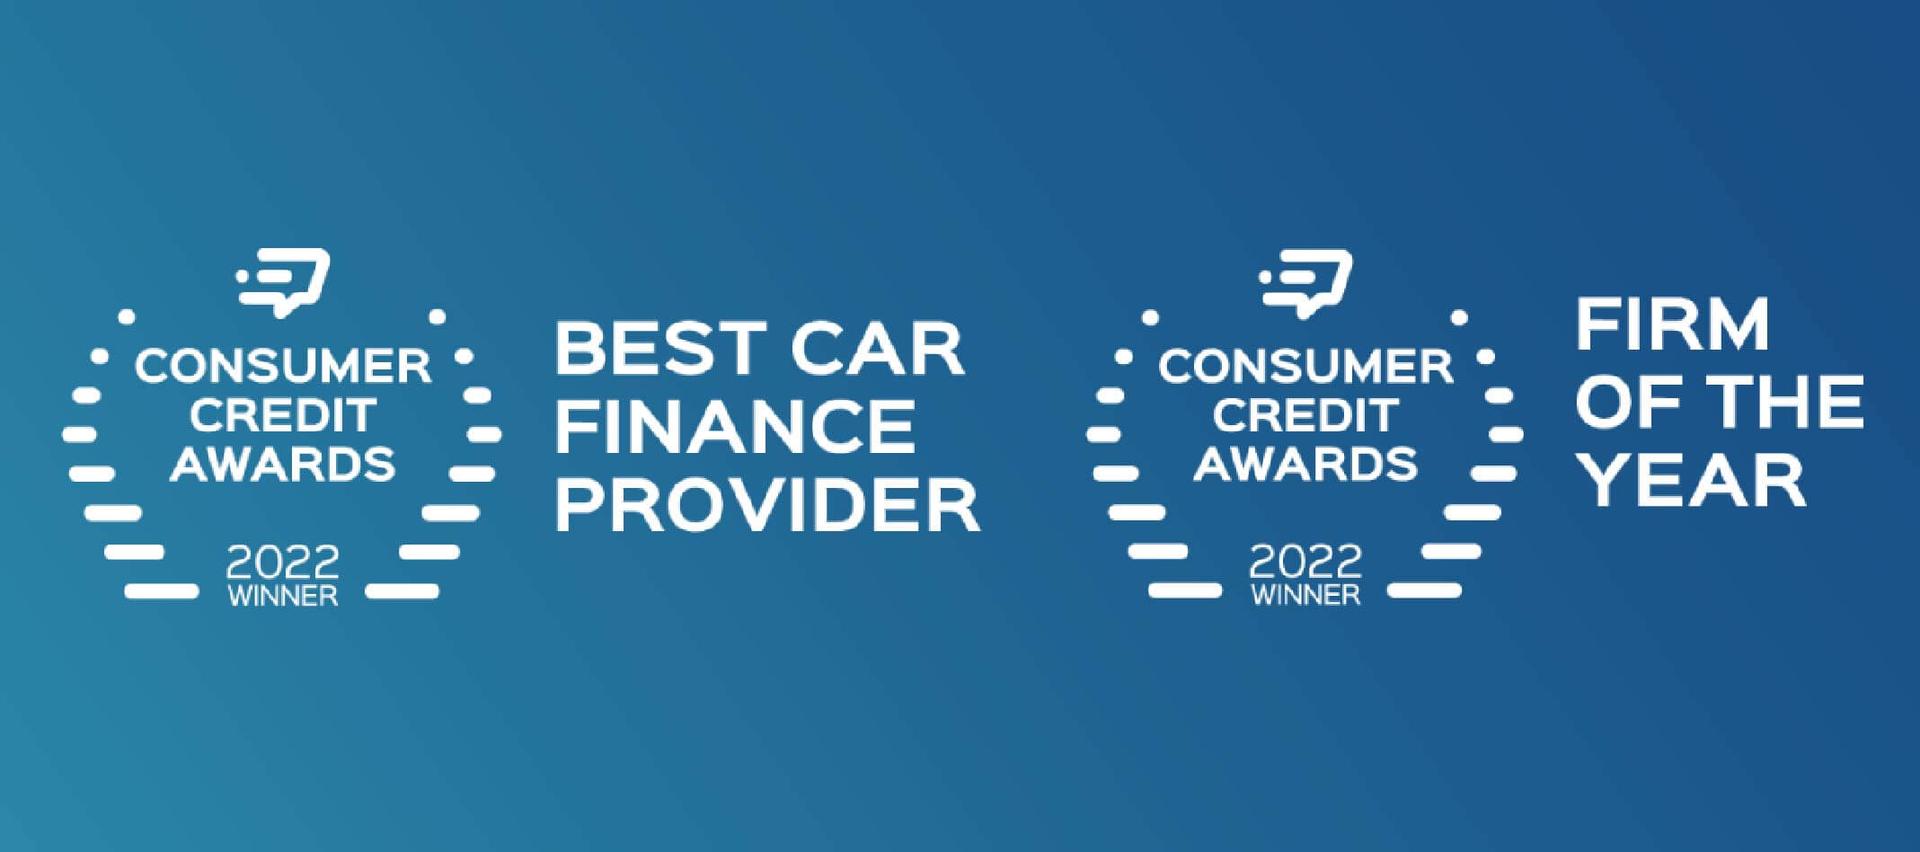 First Response Finance achieves two accolades at the Consumer Credit Awards 2022